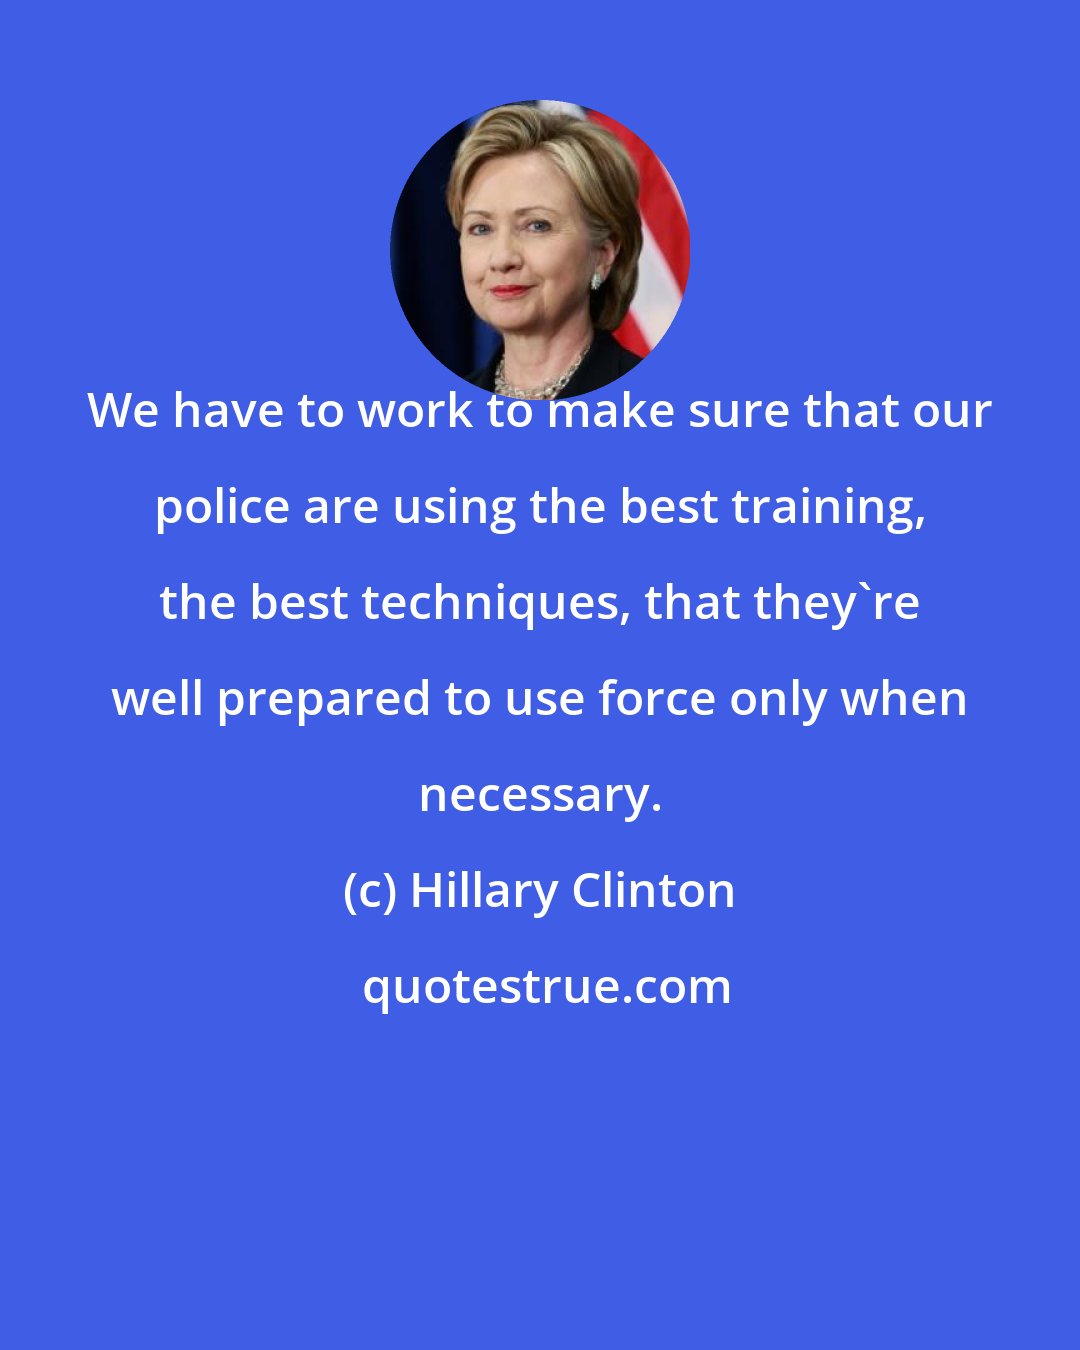 Hillary Clinton: We have to work to make sure that our police are using the best training, the best techniques, that they're well prepared to use force only when necessary.